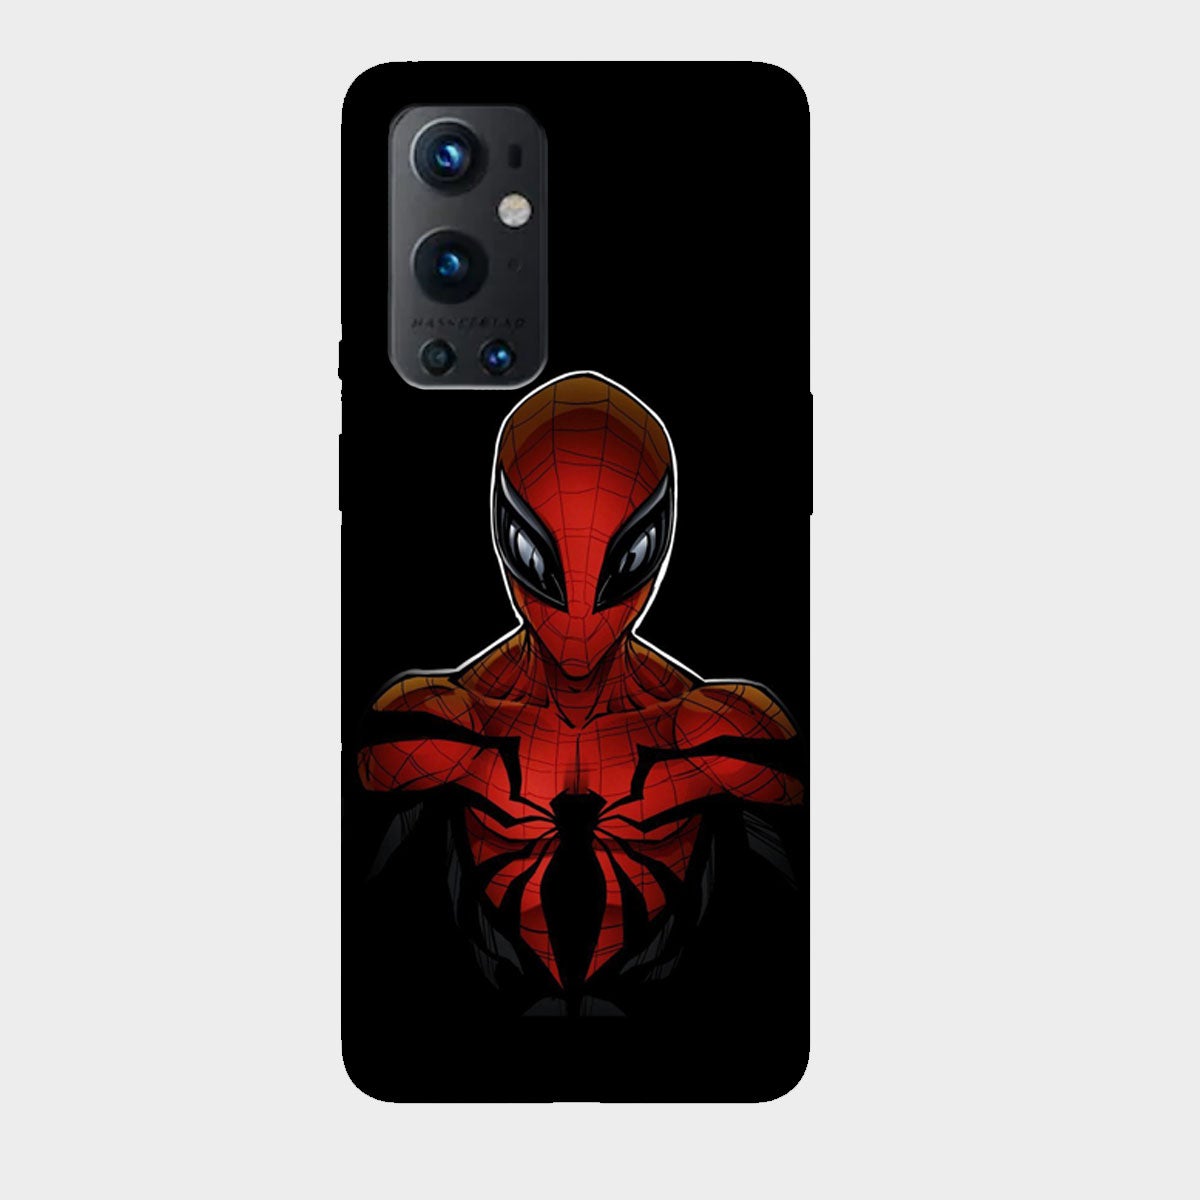 Spider Man - Animated - Mobile Phone Cover - Hard Case - OnePlus